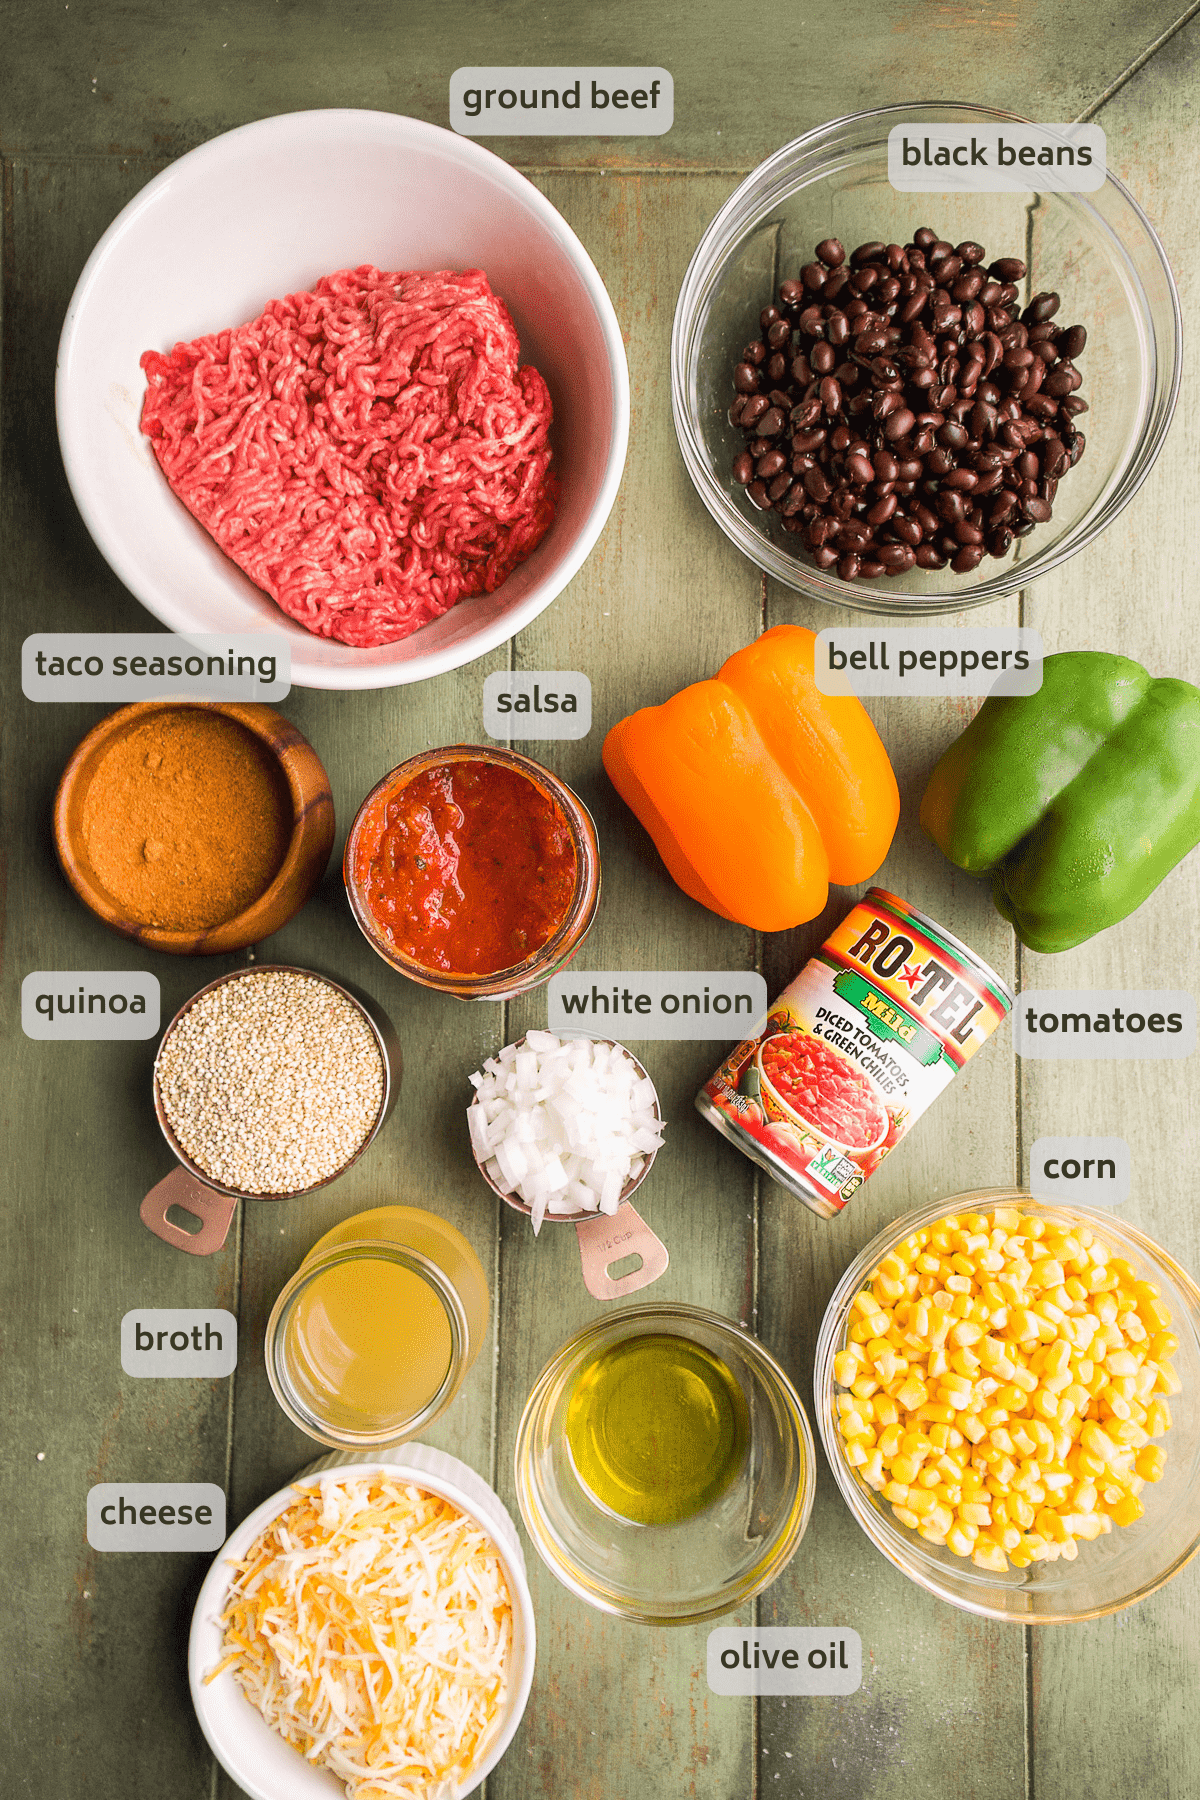 Taco casserole ingredients on a green surface.